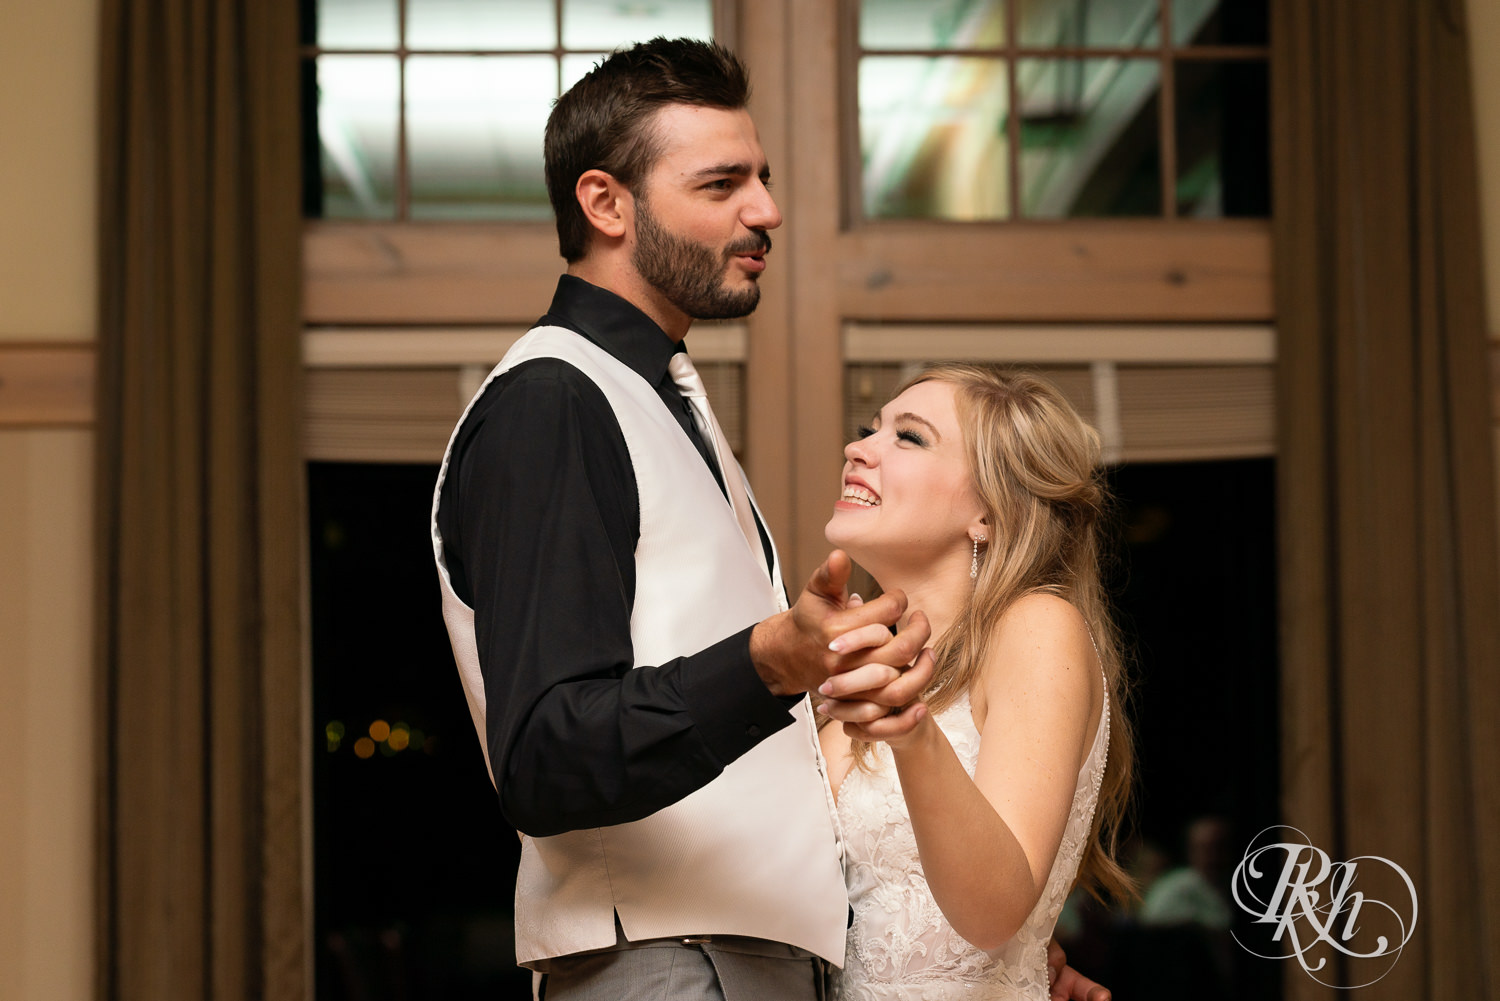 Bride and groom share first dance on wedding day at Bunker Hills Event Center in Coon Rapids, Minnesota.